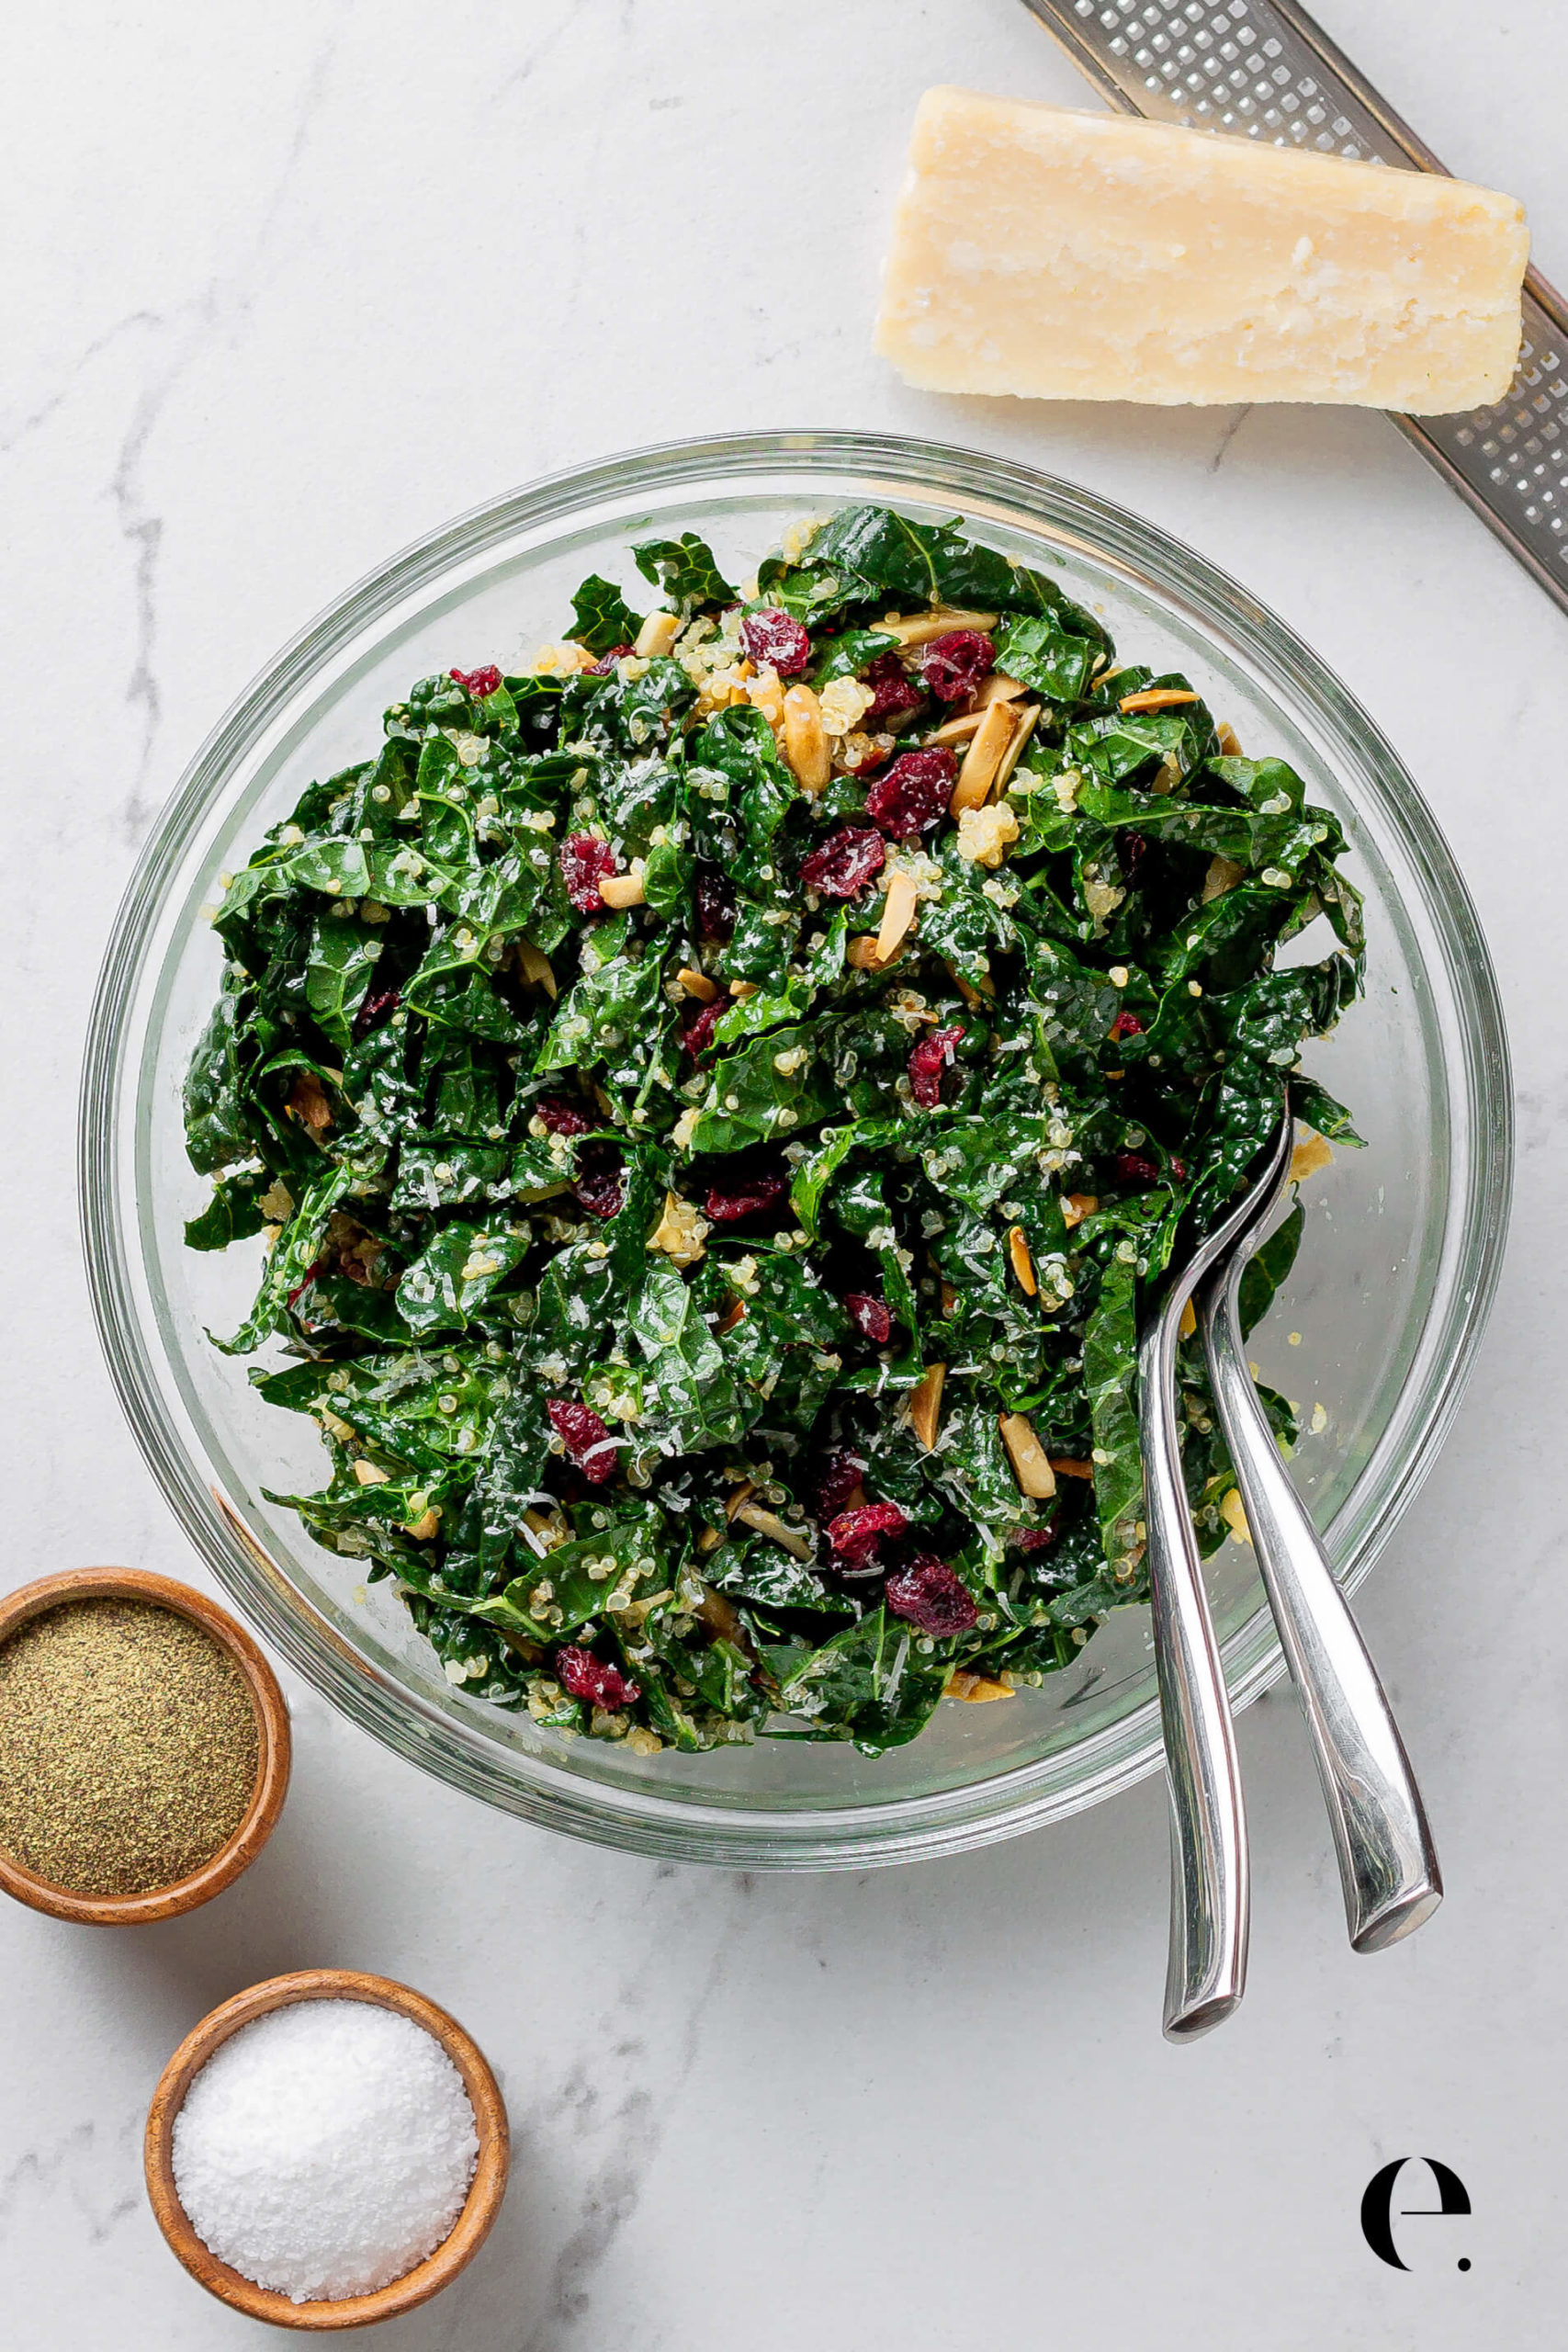 Cranberry, Kale & Quinoa Salad in bowl with spoons